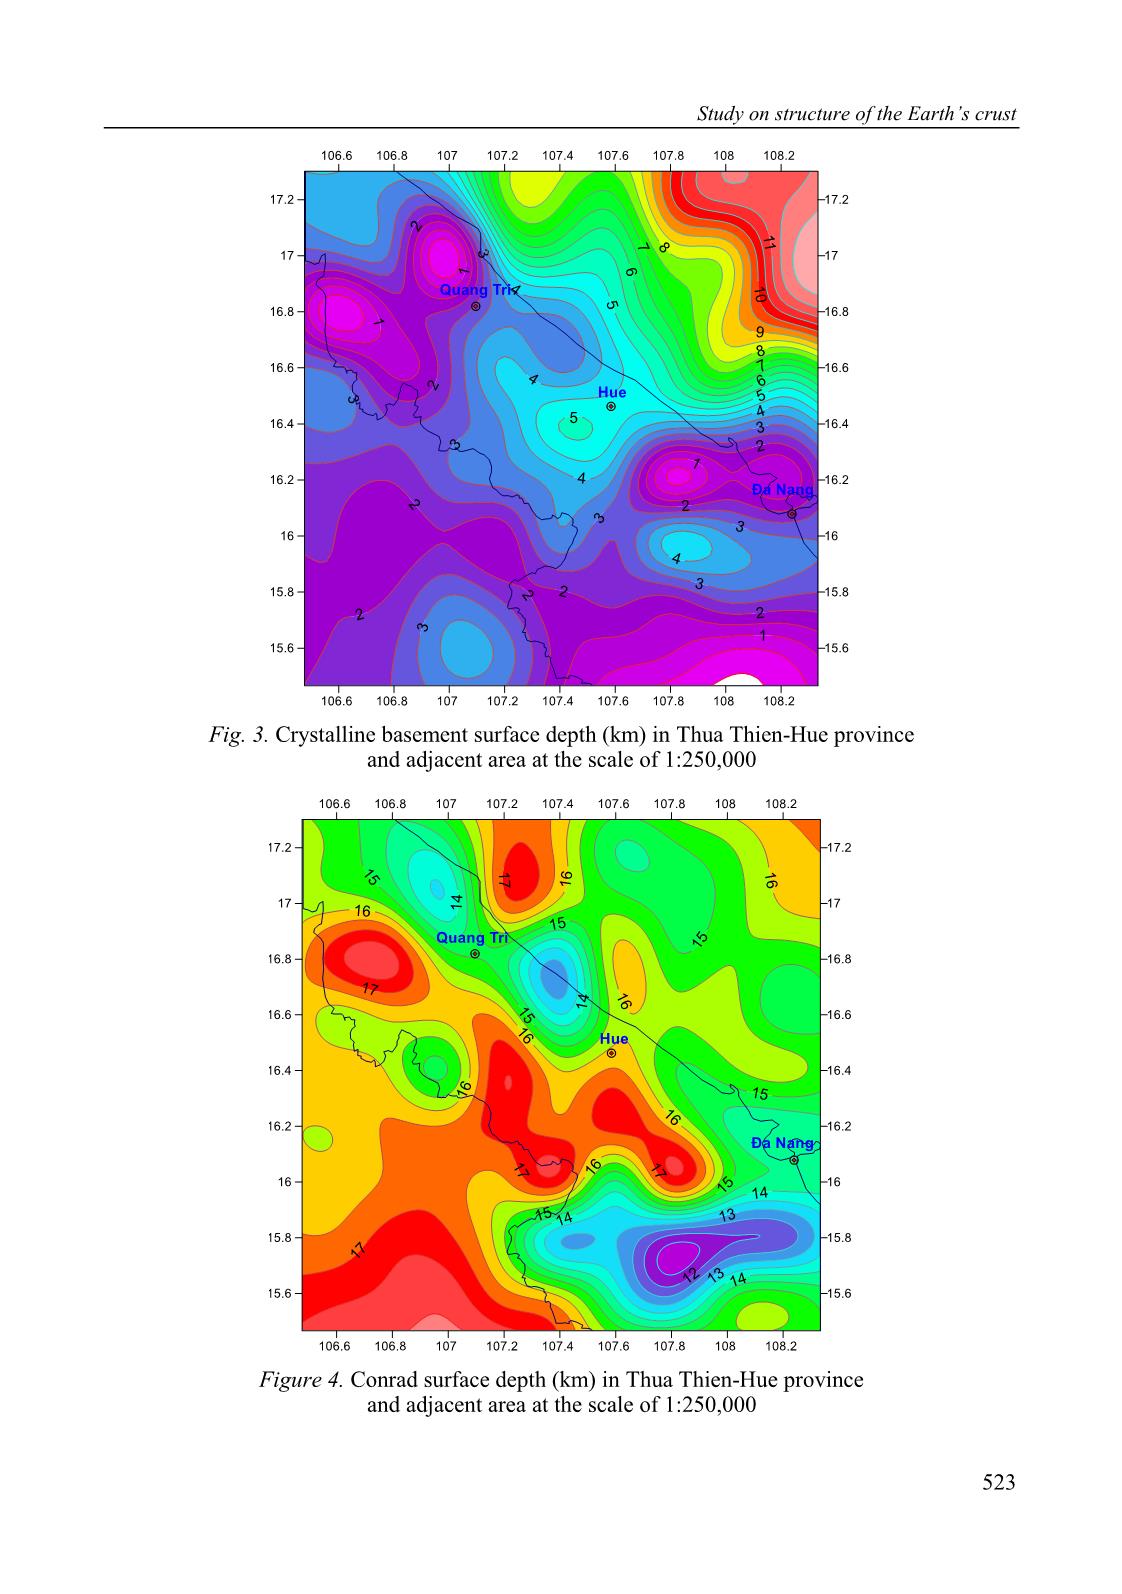 Study on structure of the Earth’s crust in Thua Thien-Hue province and adjacent areas by using gravity and magnetic data in combination trang 7